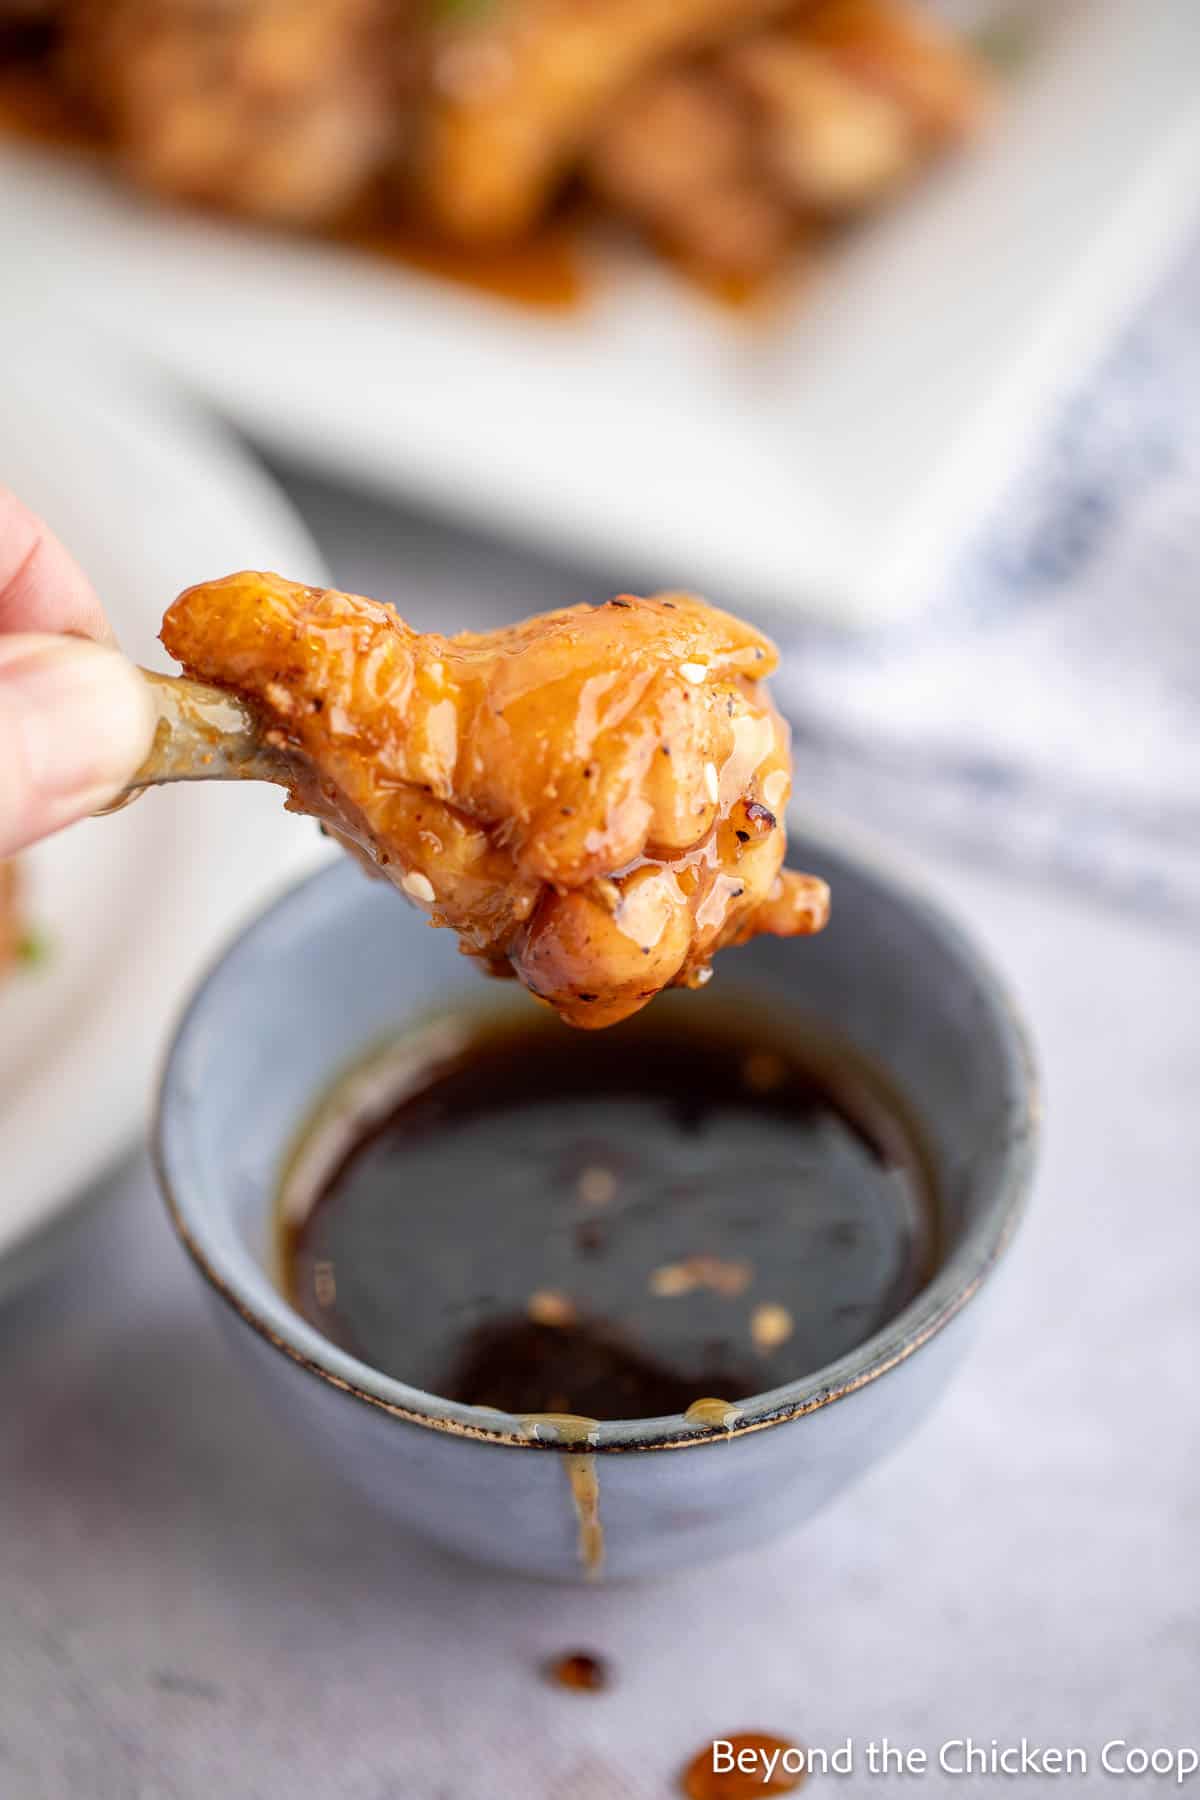 Baked chicken wing dipped into a sauce. 